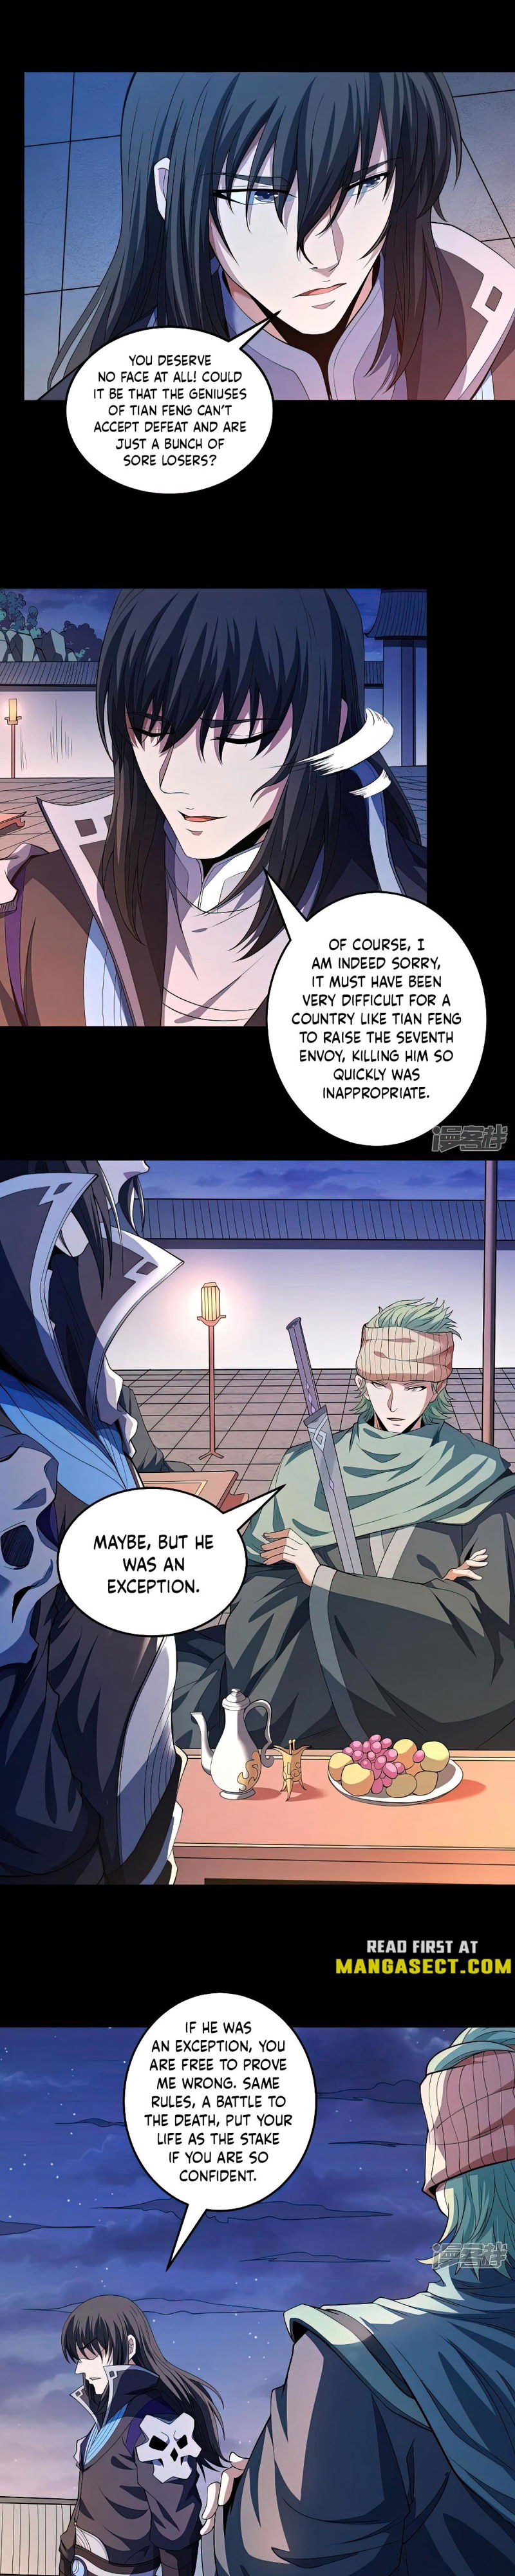 God of Martial Arts Chapter 606 page 11